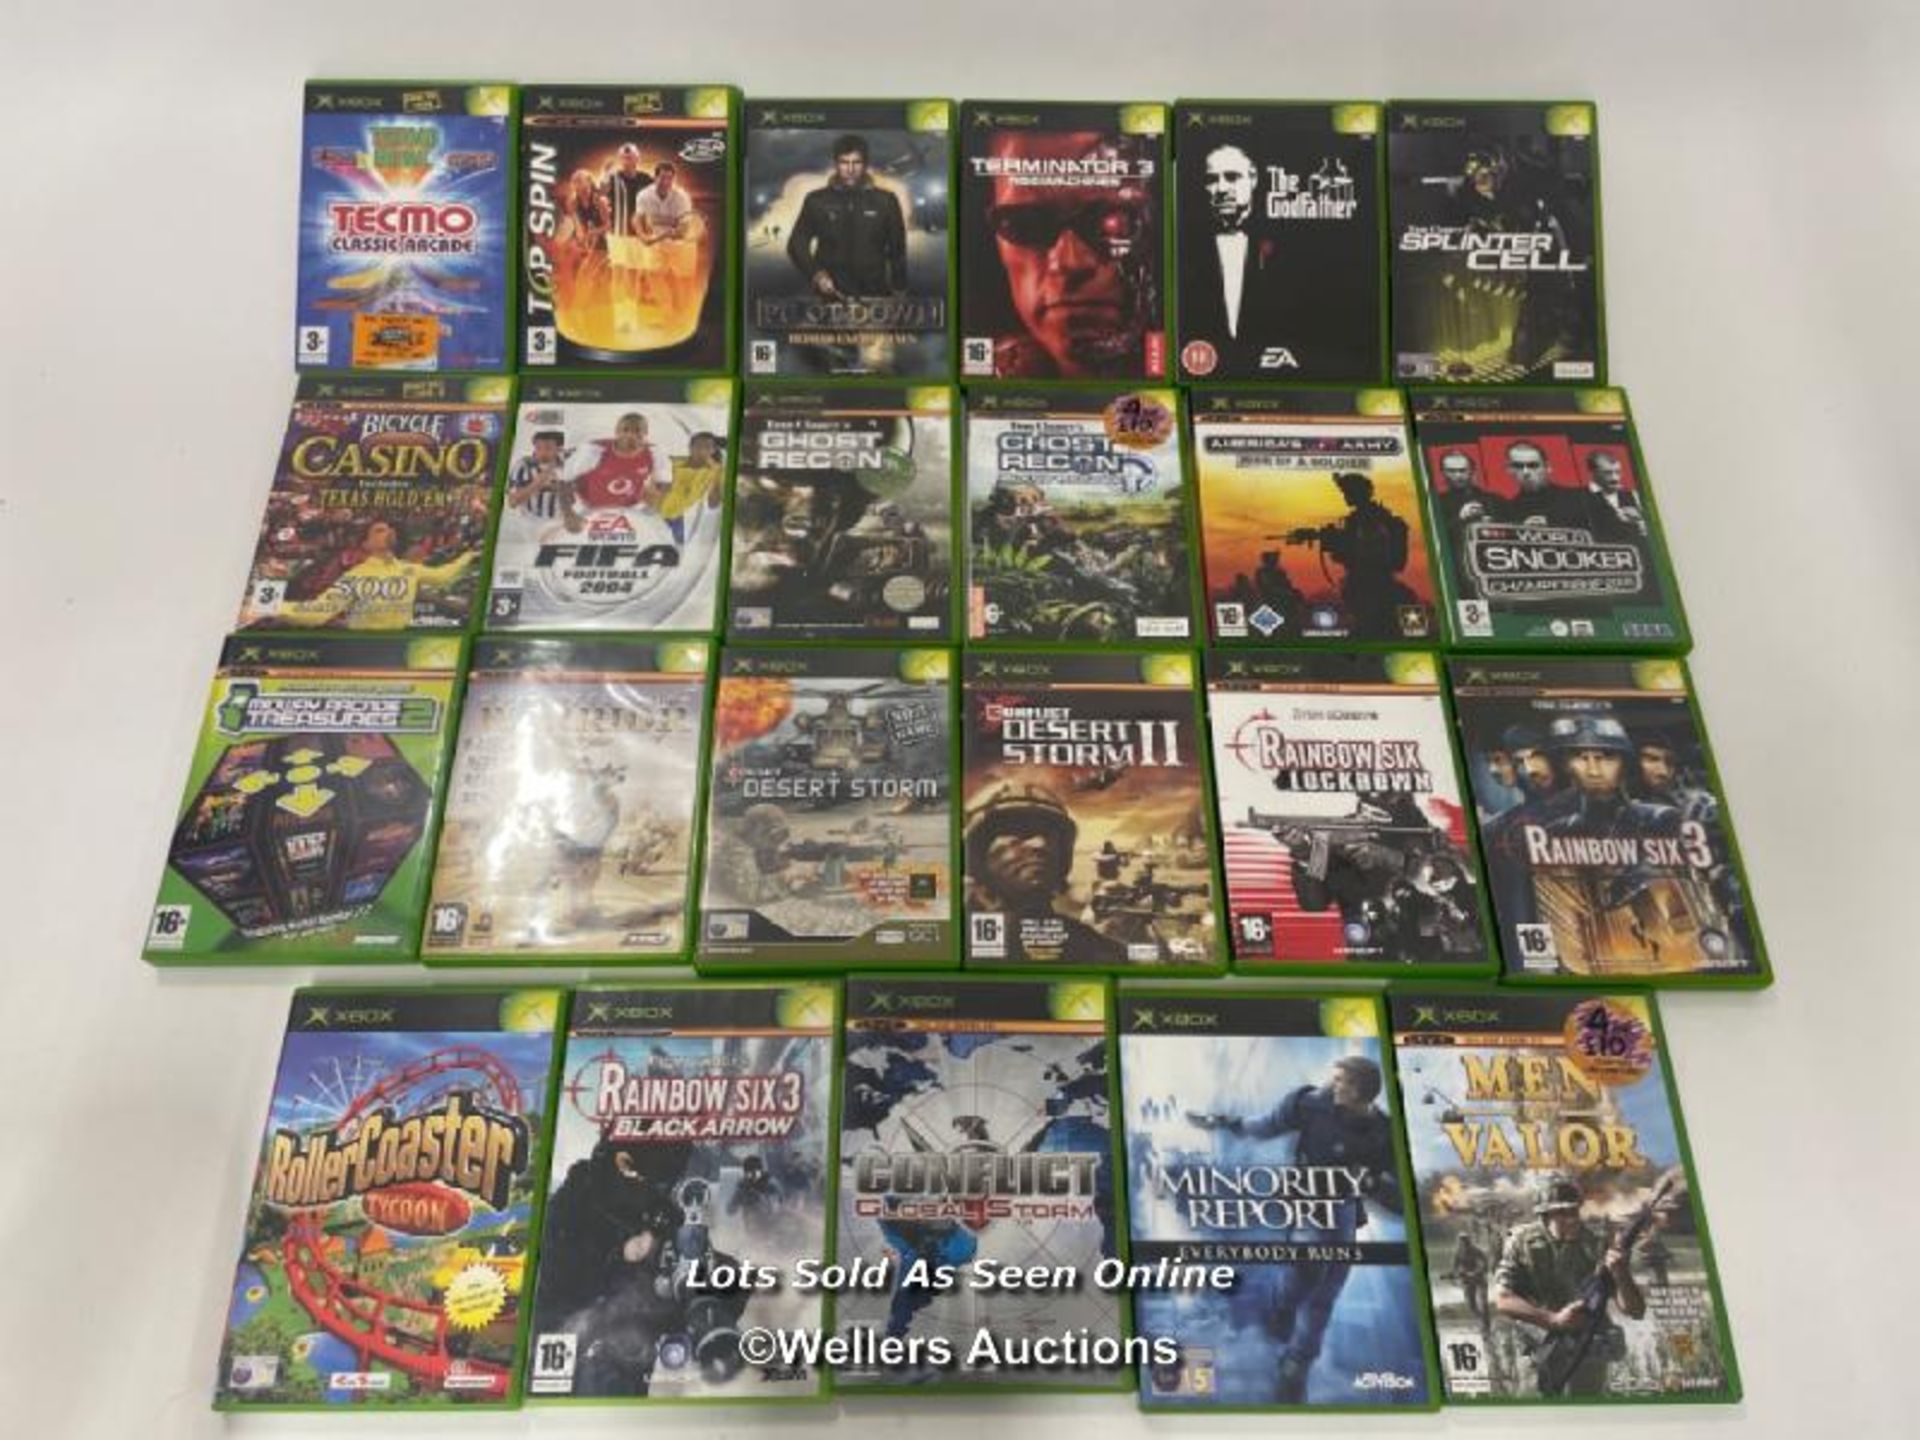 Assorted XBOX games including Terminator 3, Splinter Cell and The Godfather (23)